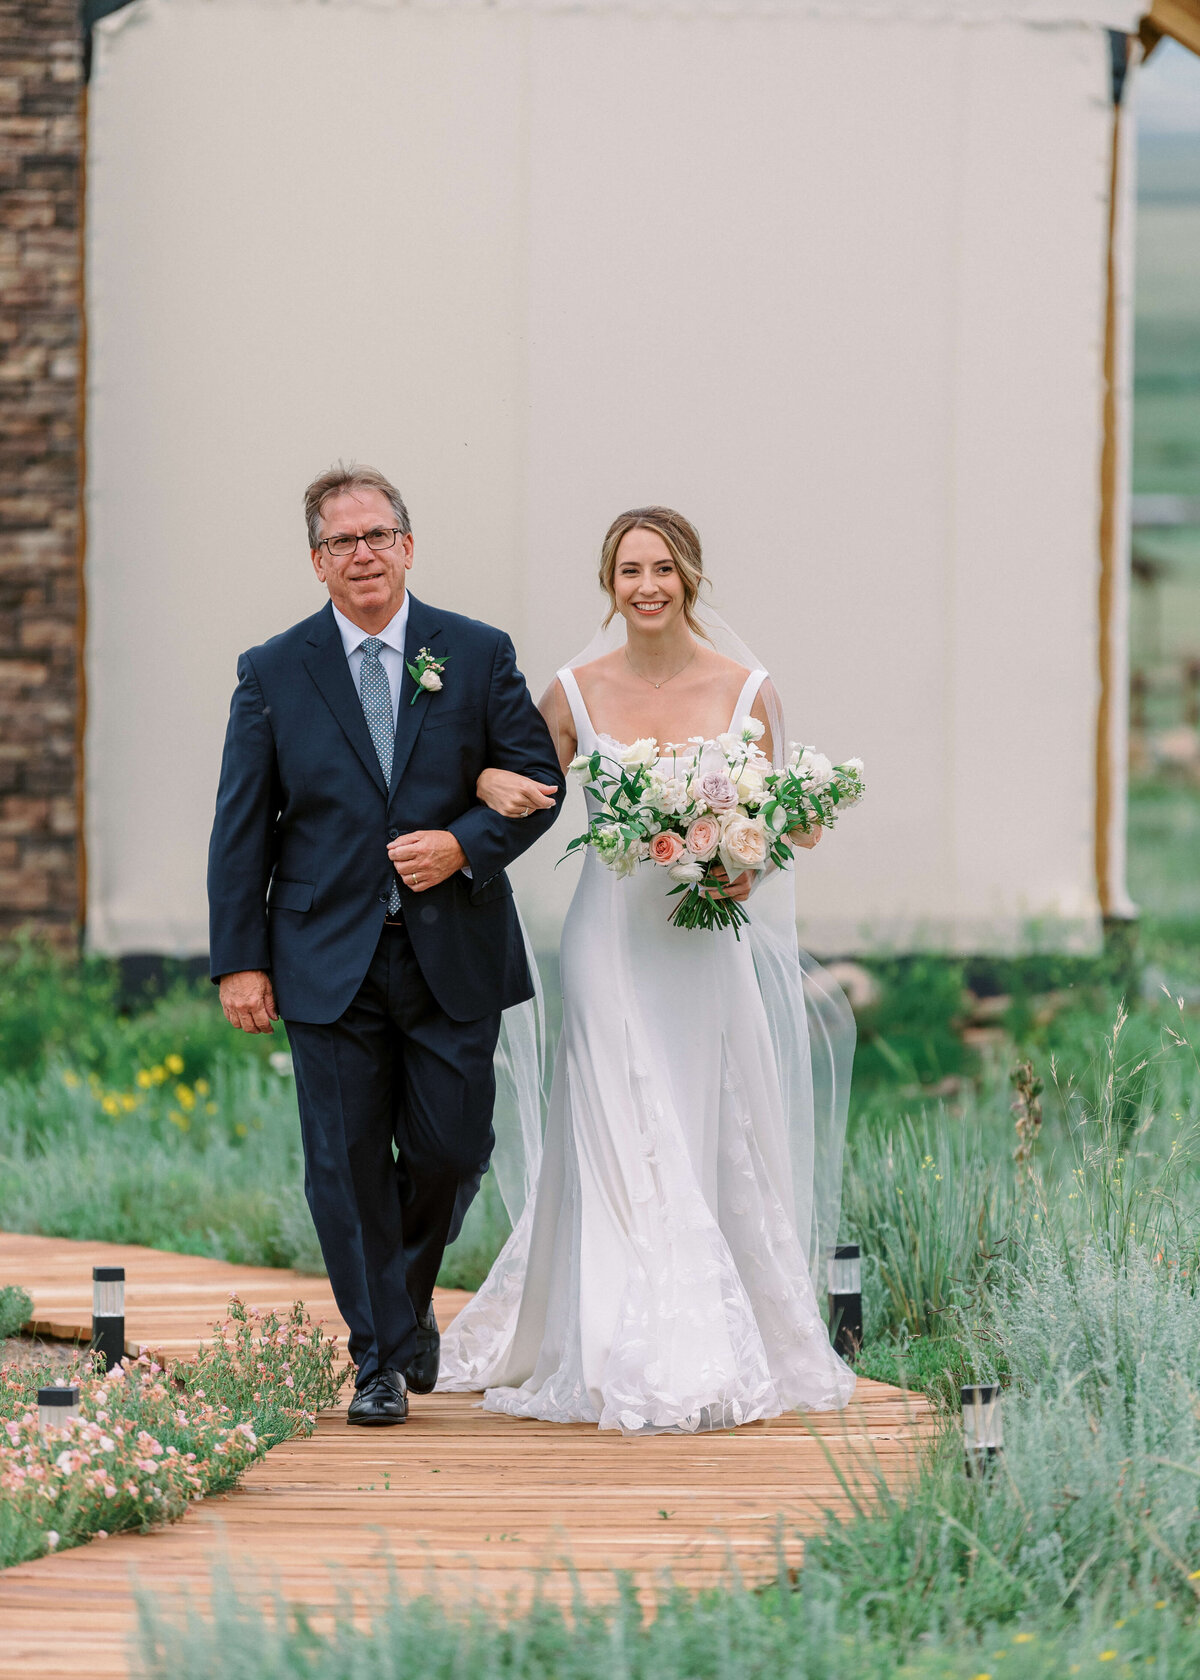 A proud father walks his daughter down the long walkway to her wedding ceremony